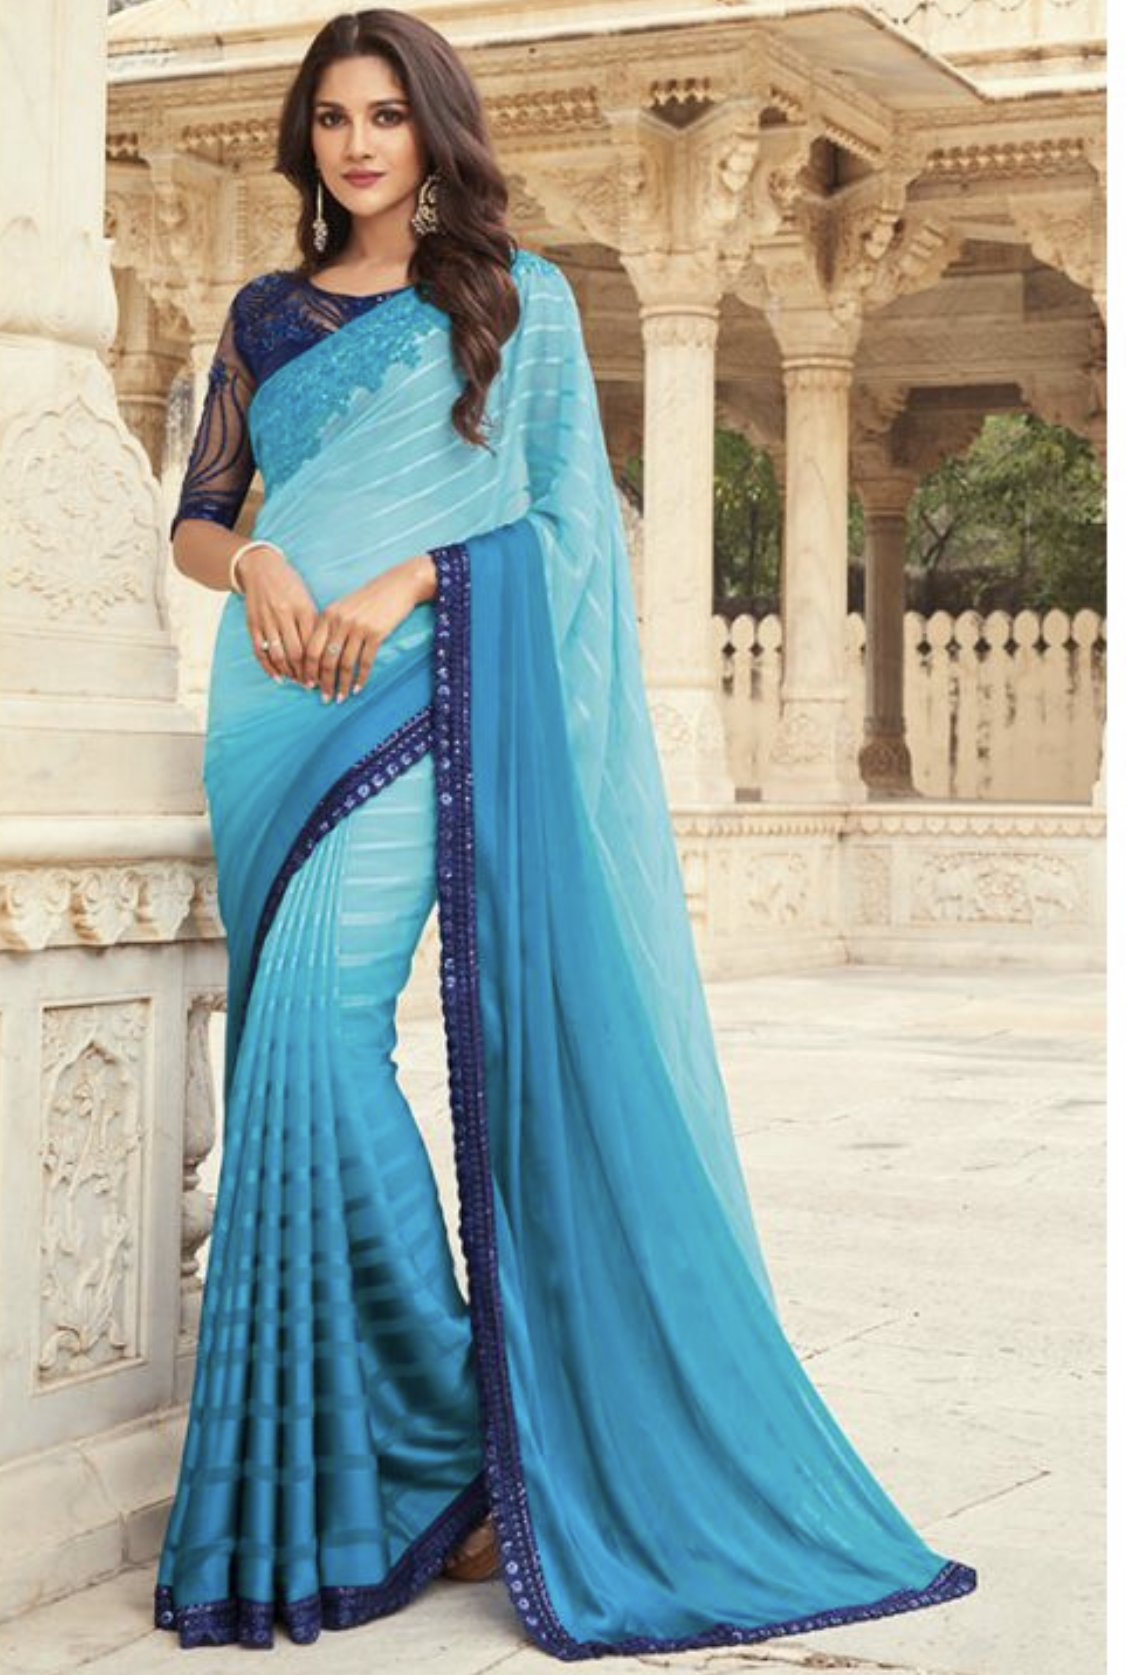 Plain Georgette Teal Blue Saree With Embroidered Blouse|SARV143406